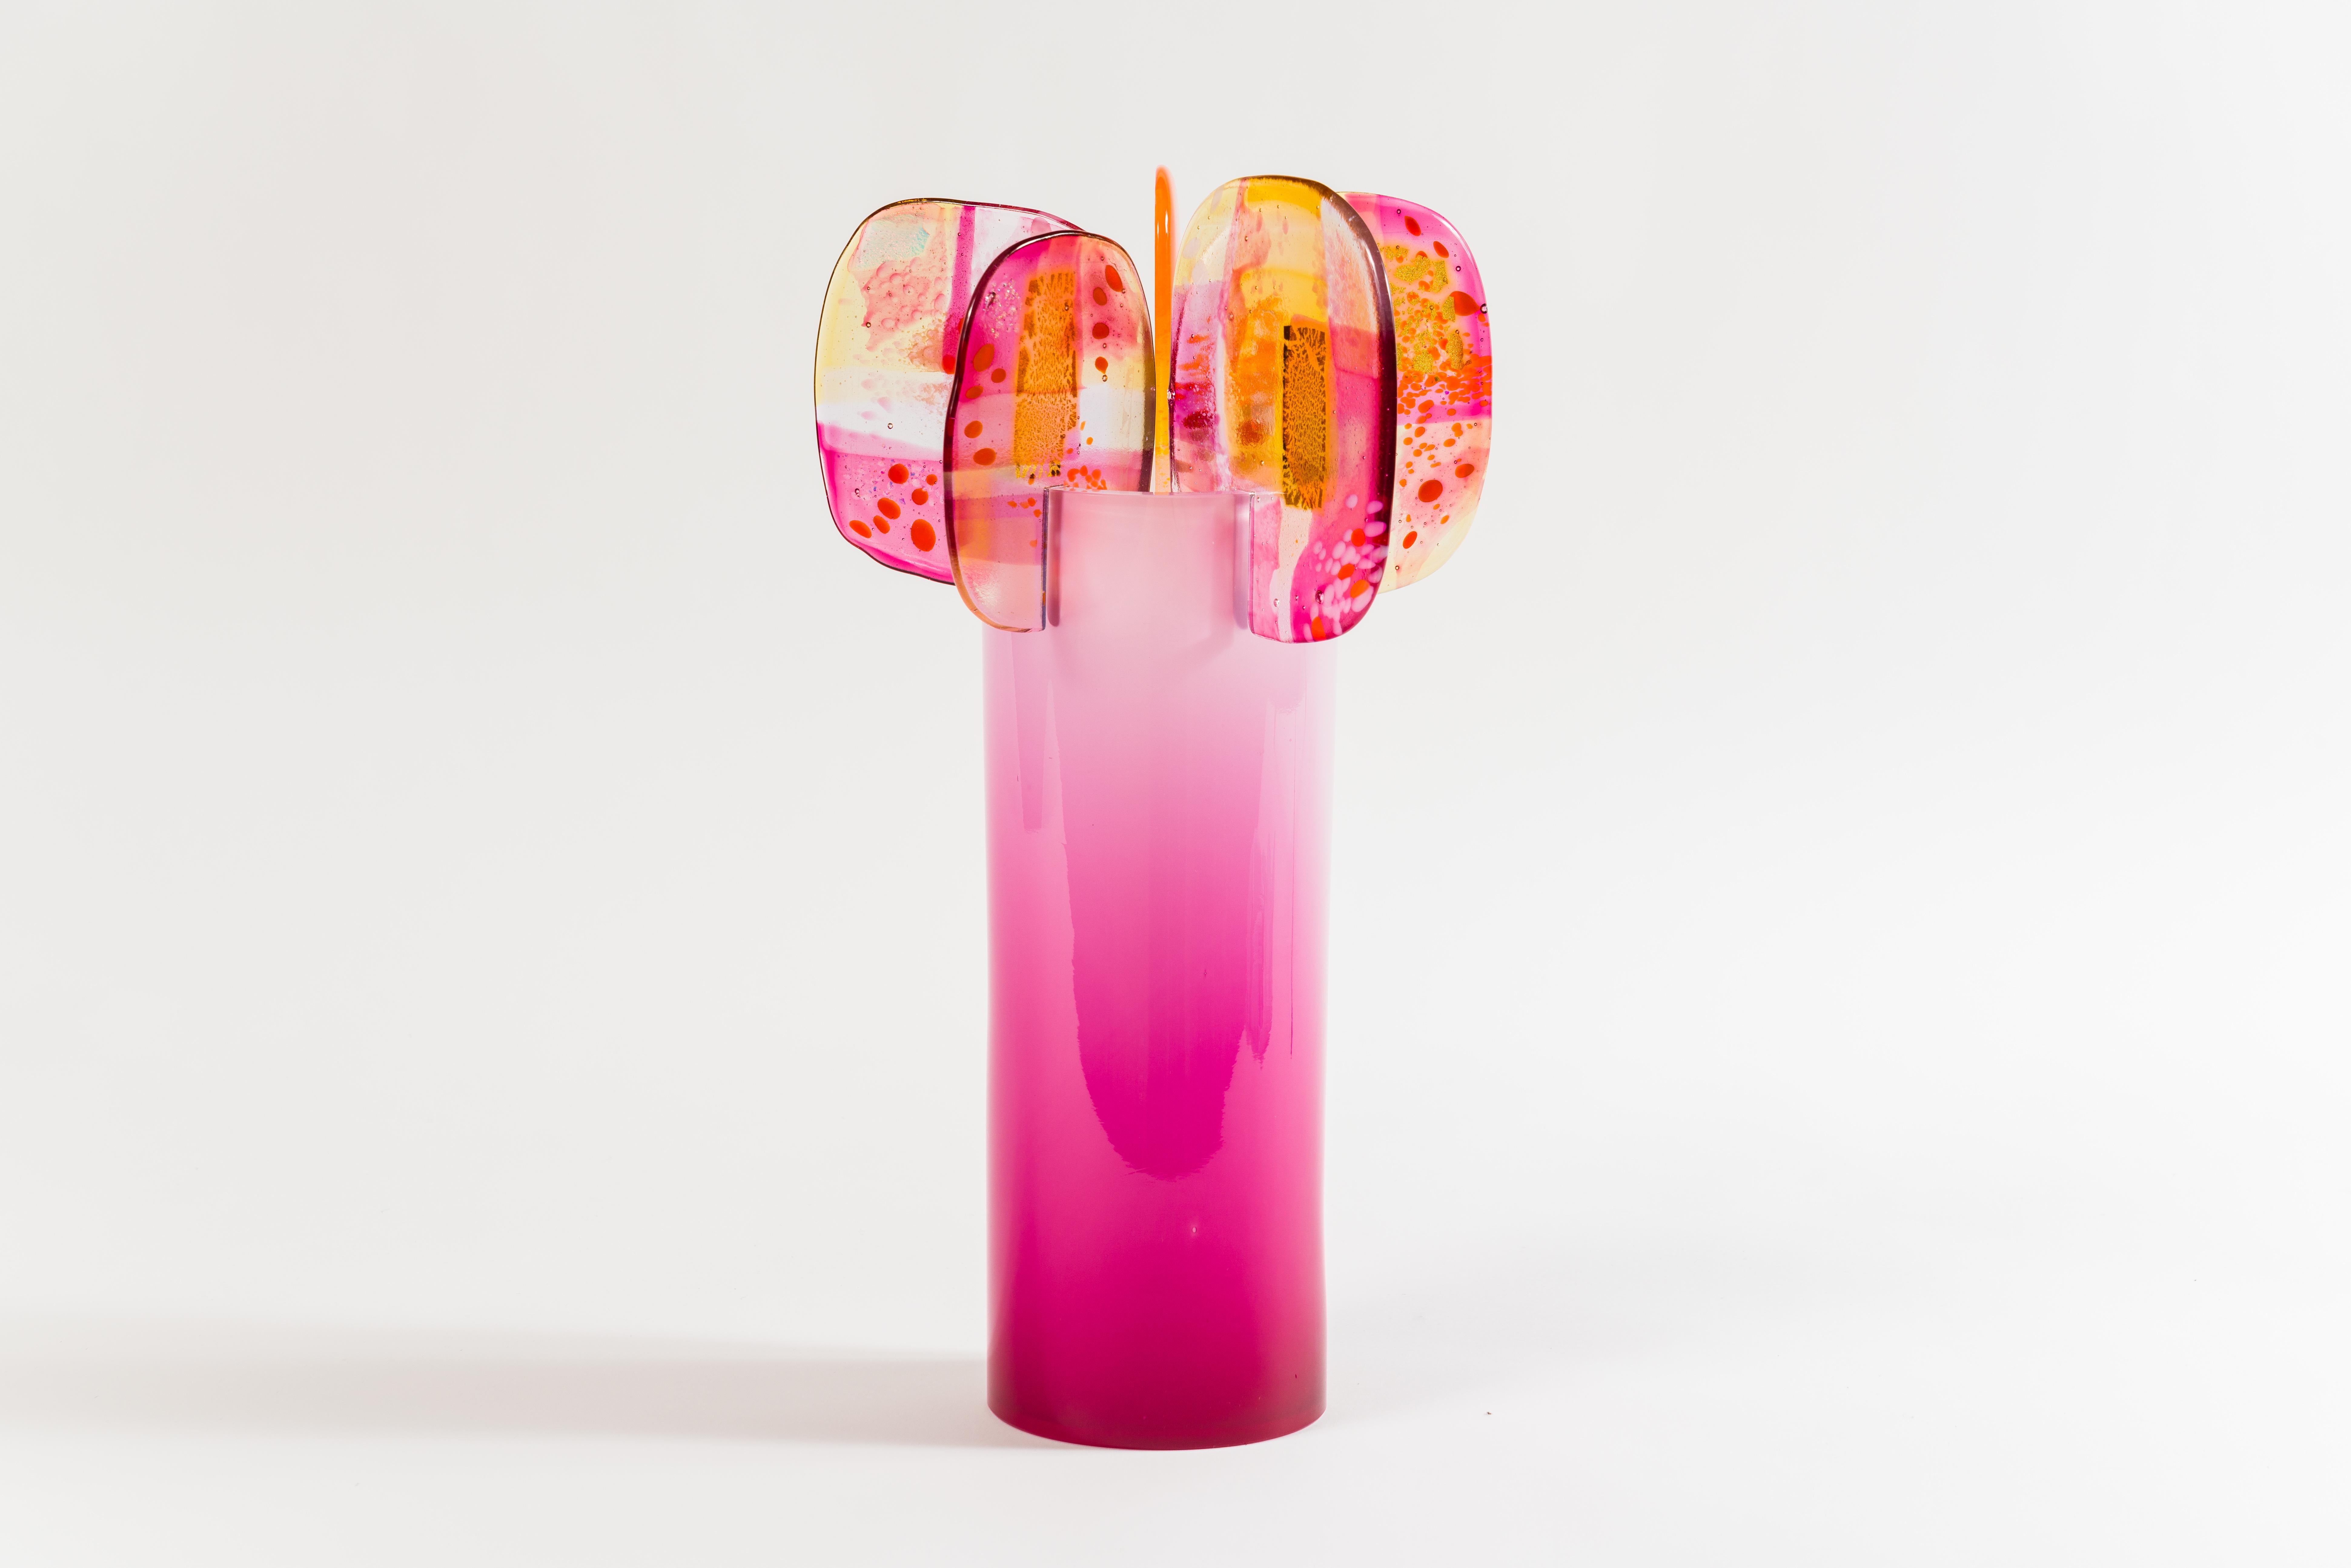 Amy Cushing has gained international acclaim for her large-scale, site-specific installations of handmade colored glass and intimate cross discipline glass sculptures. 

Her new sculpture series “Paradise” was created as the artist’s antidote to